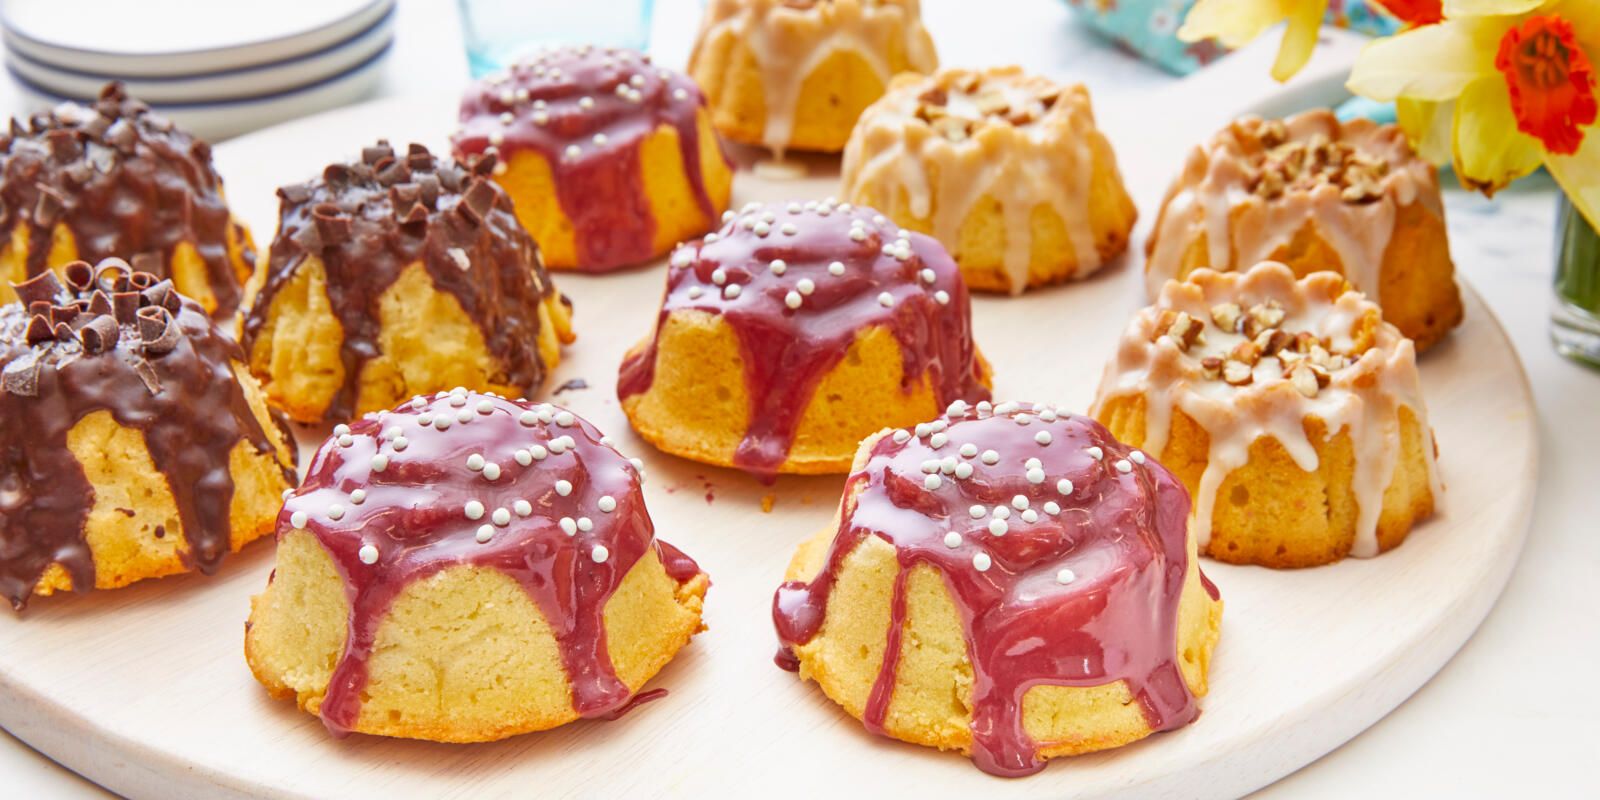 Fall in love with this Bundt pan - The Boston Globe